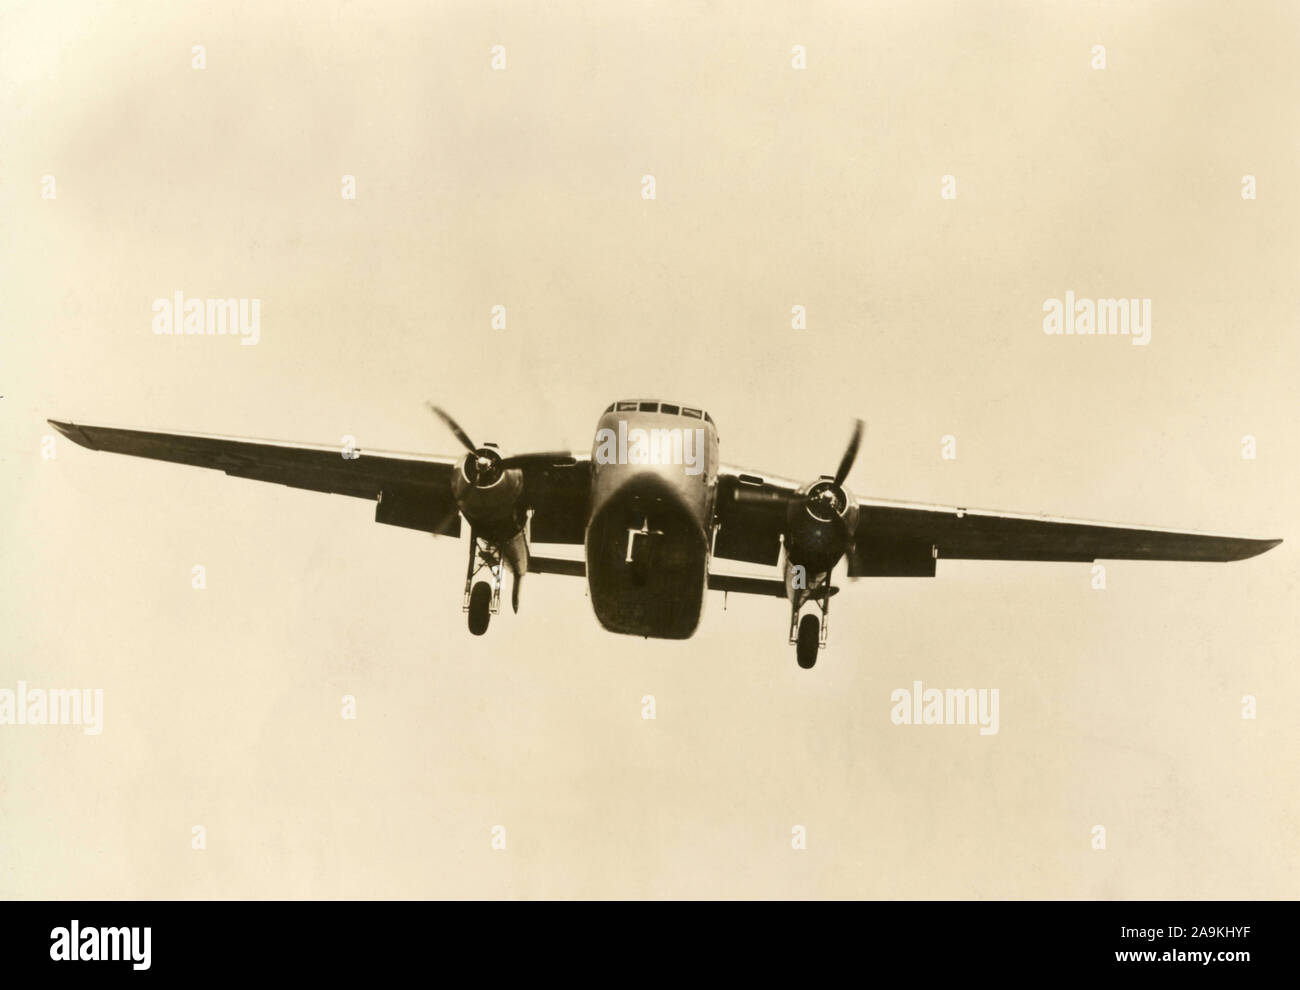 A twin-engine military aircraft , Italy Stock Photo